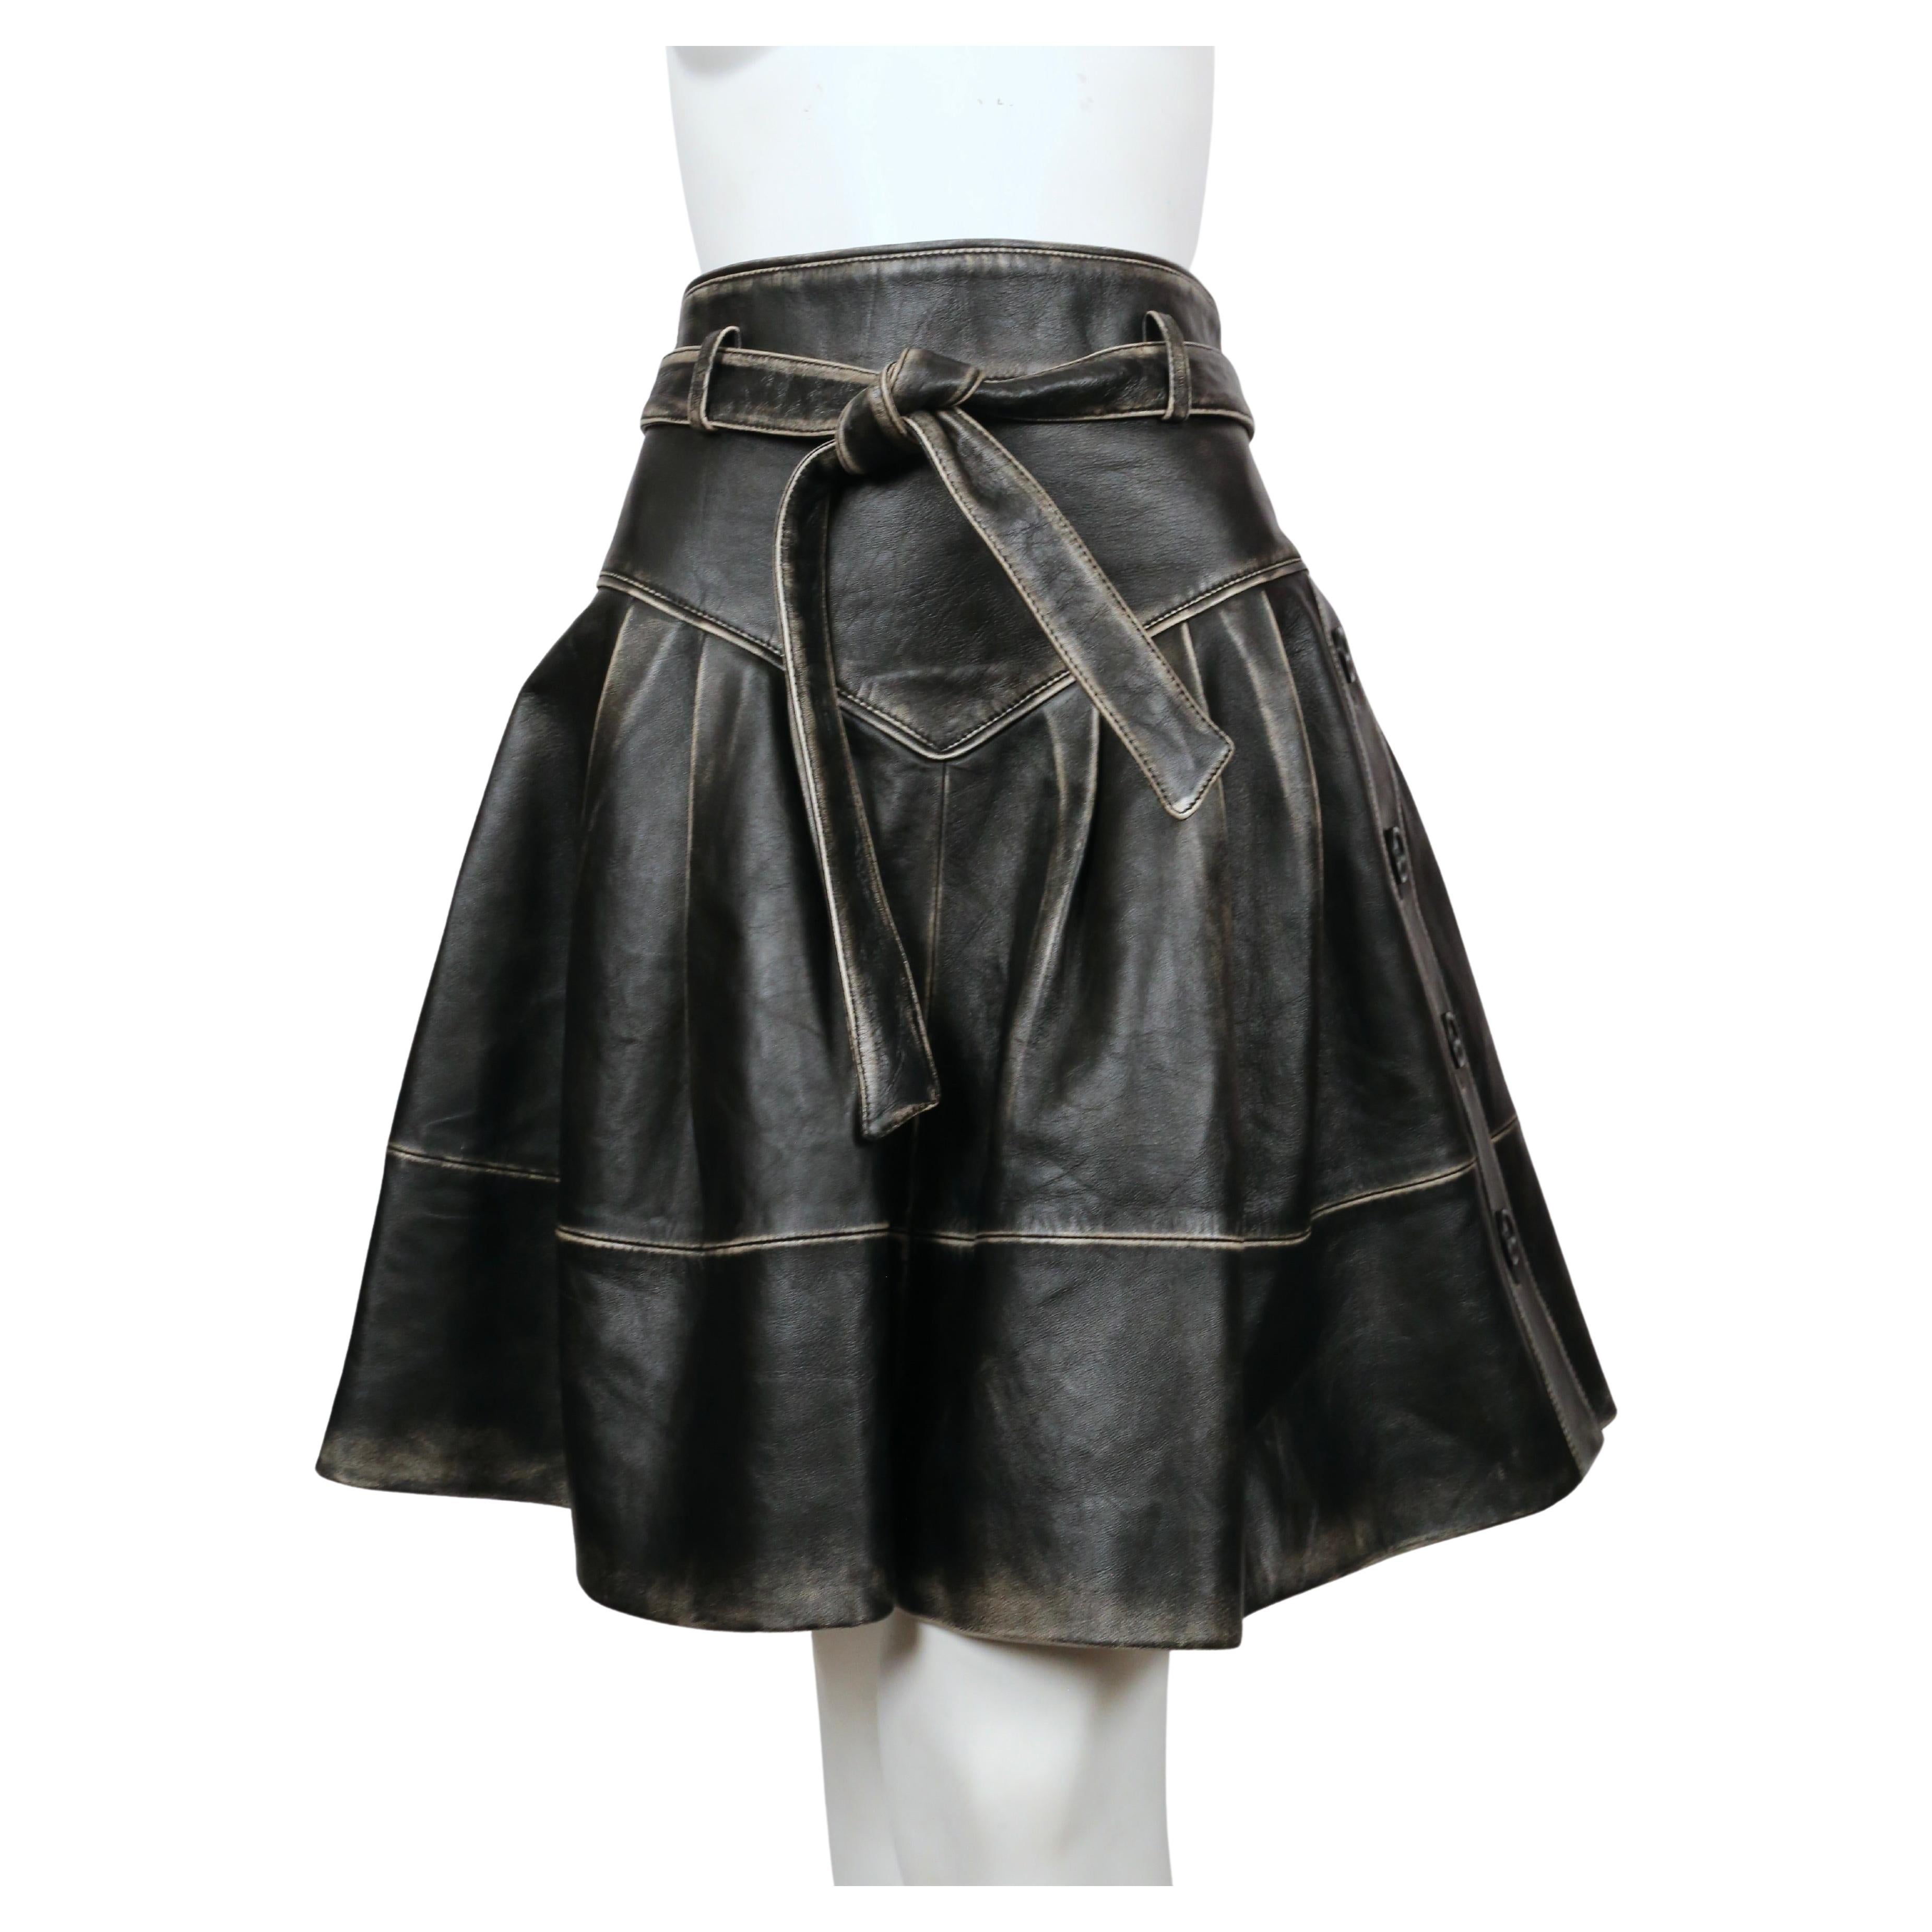 Distressed, black-brown leather skirt with belt and side button detail from Miu Miu dating to pre-fall 2018. Skirt is labeled an Italian size 42. Approximate measurements: waist 28